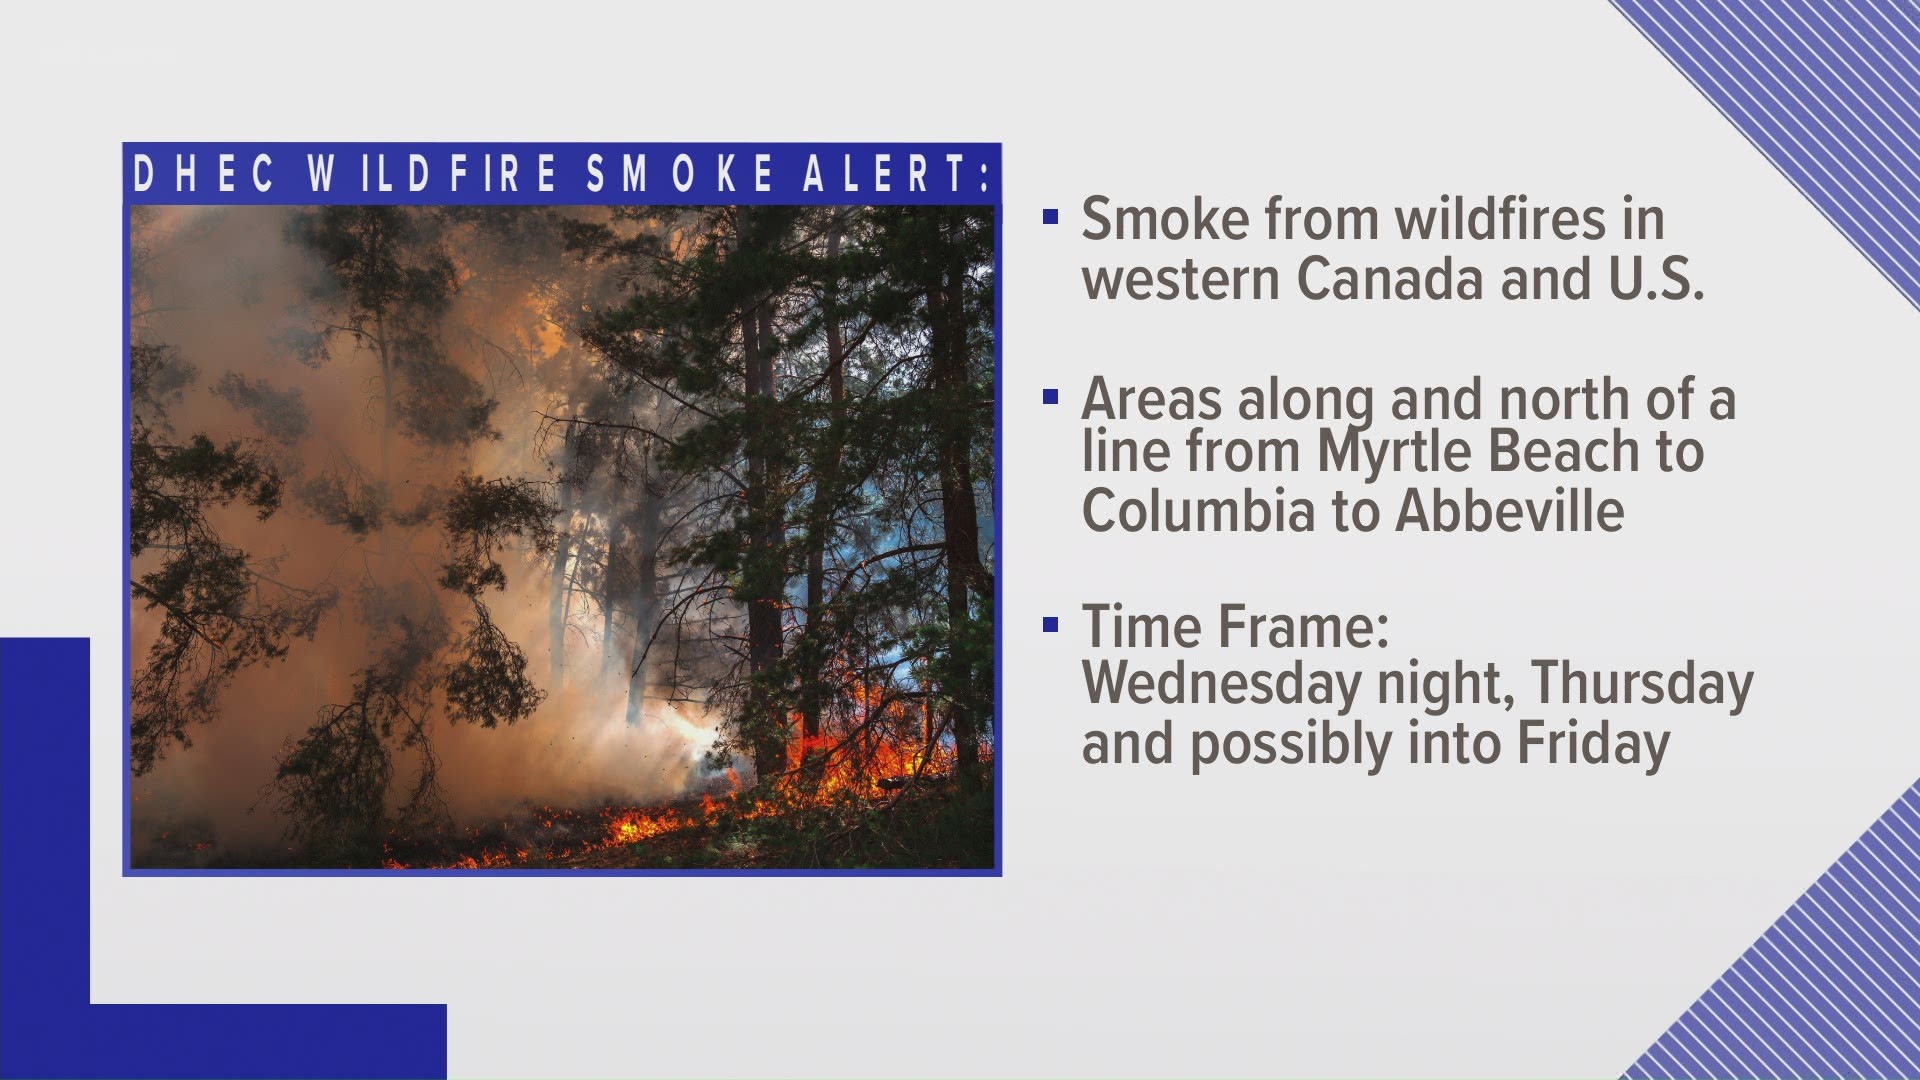 Smoke from wildfires in the western U.S. and Canada will drift across parts of SC this week and could cause problems in people with chronic heart and lung diseases.